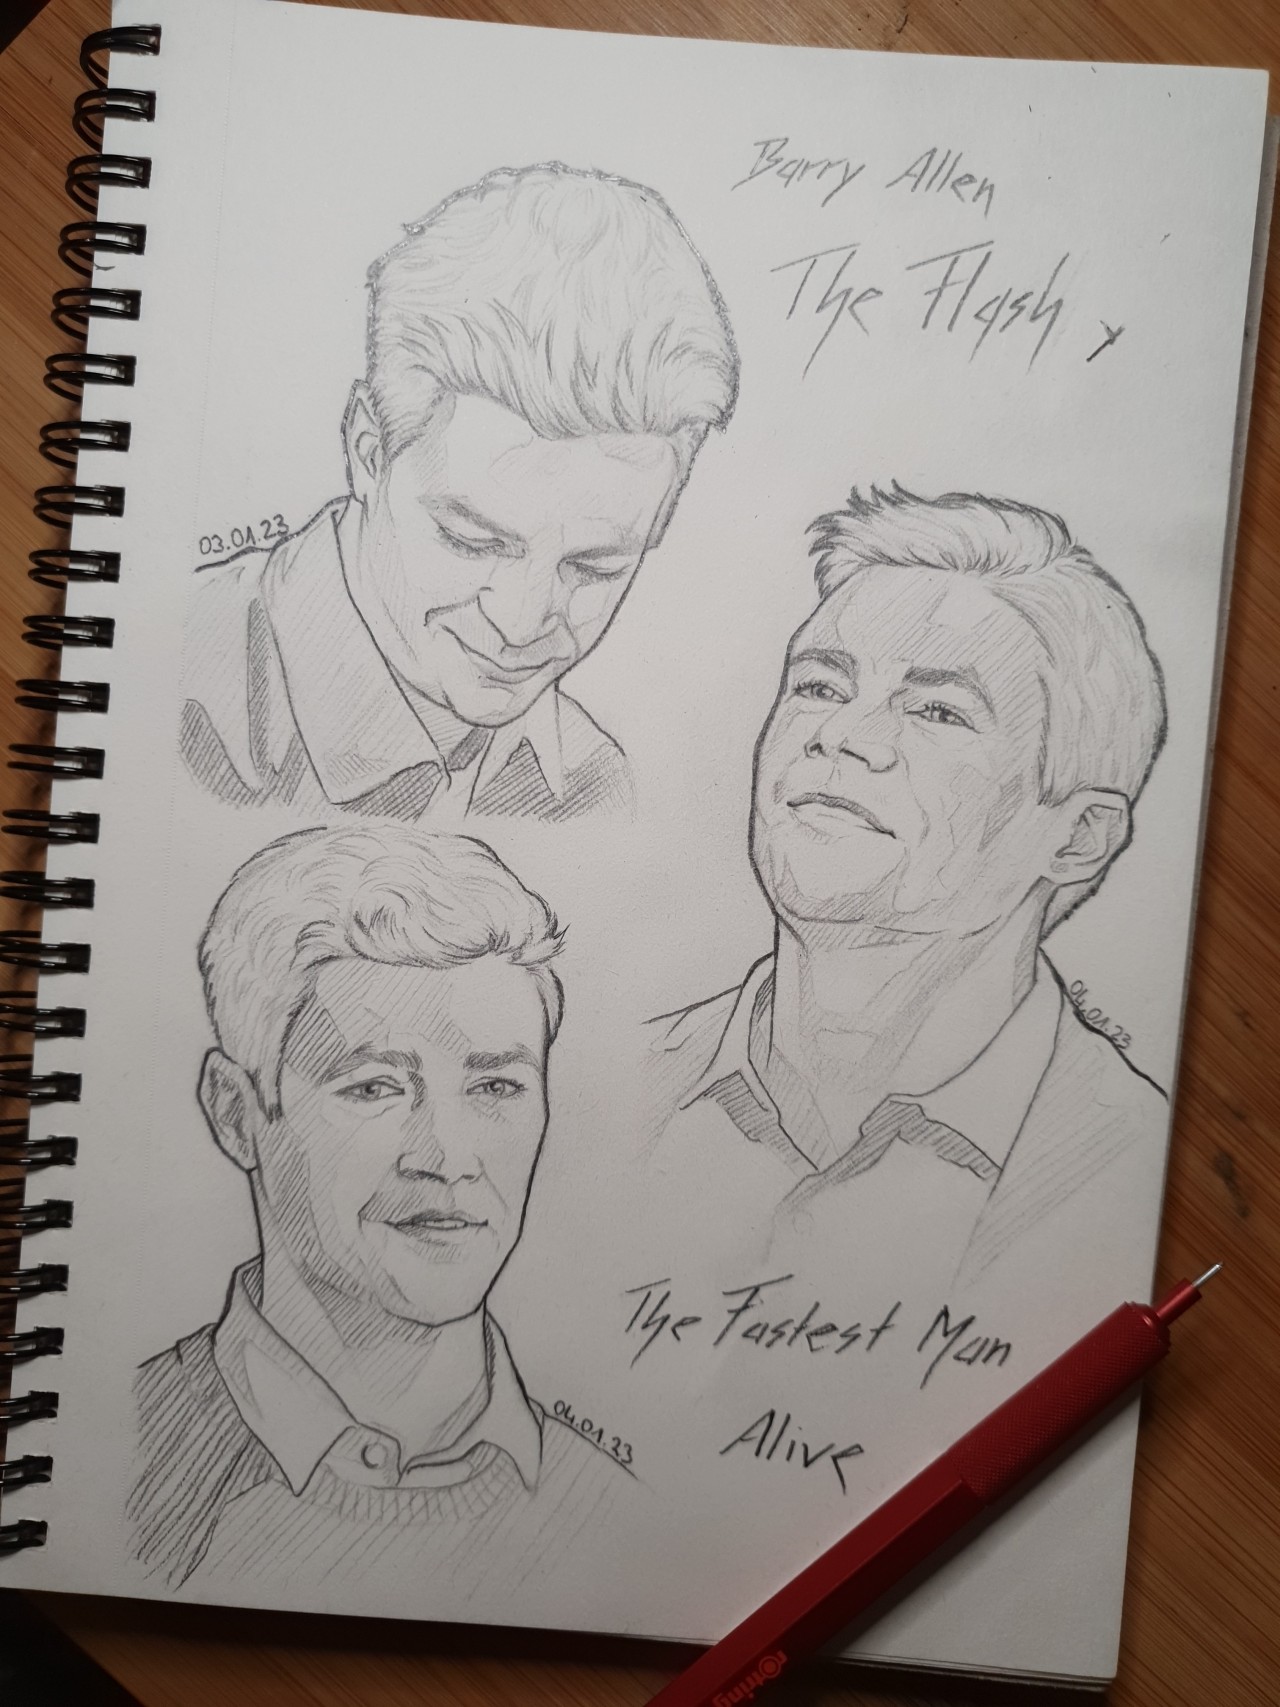 The Flash Character Drawing Sketch Print, A4 Print,the Flash, Barry Allen,  Grant Gustin,the Reverse Flash,reverb,cisco Ramon, Poster Print. - Etsy